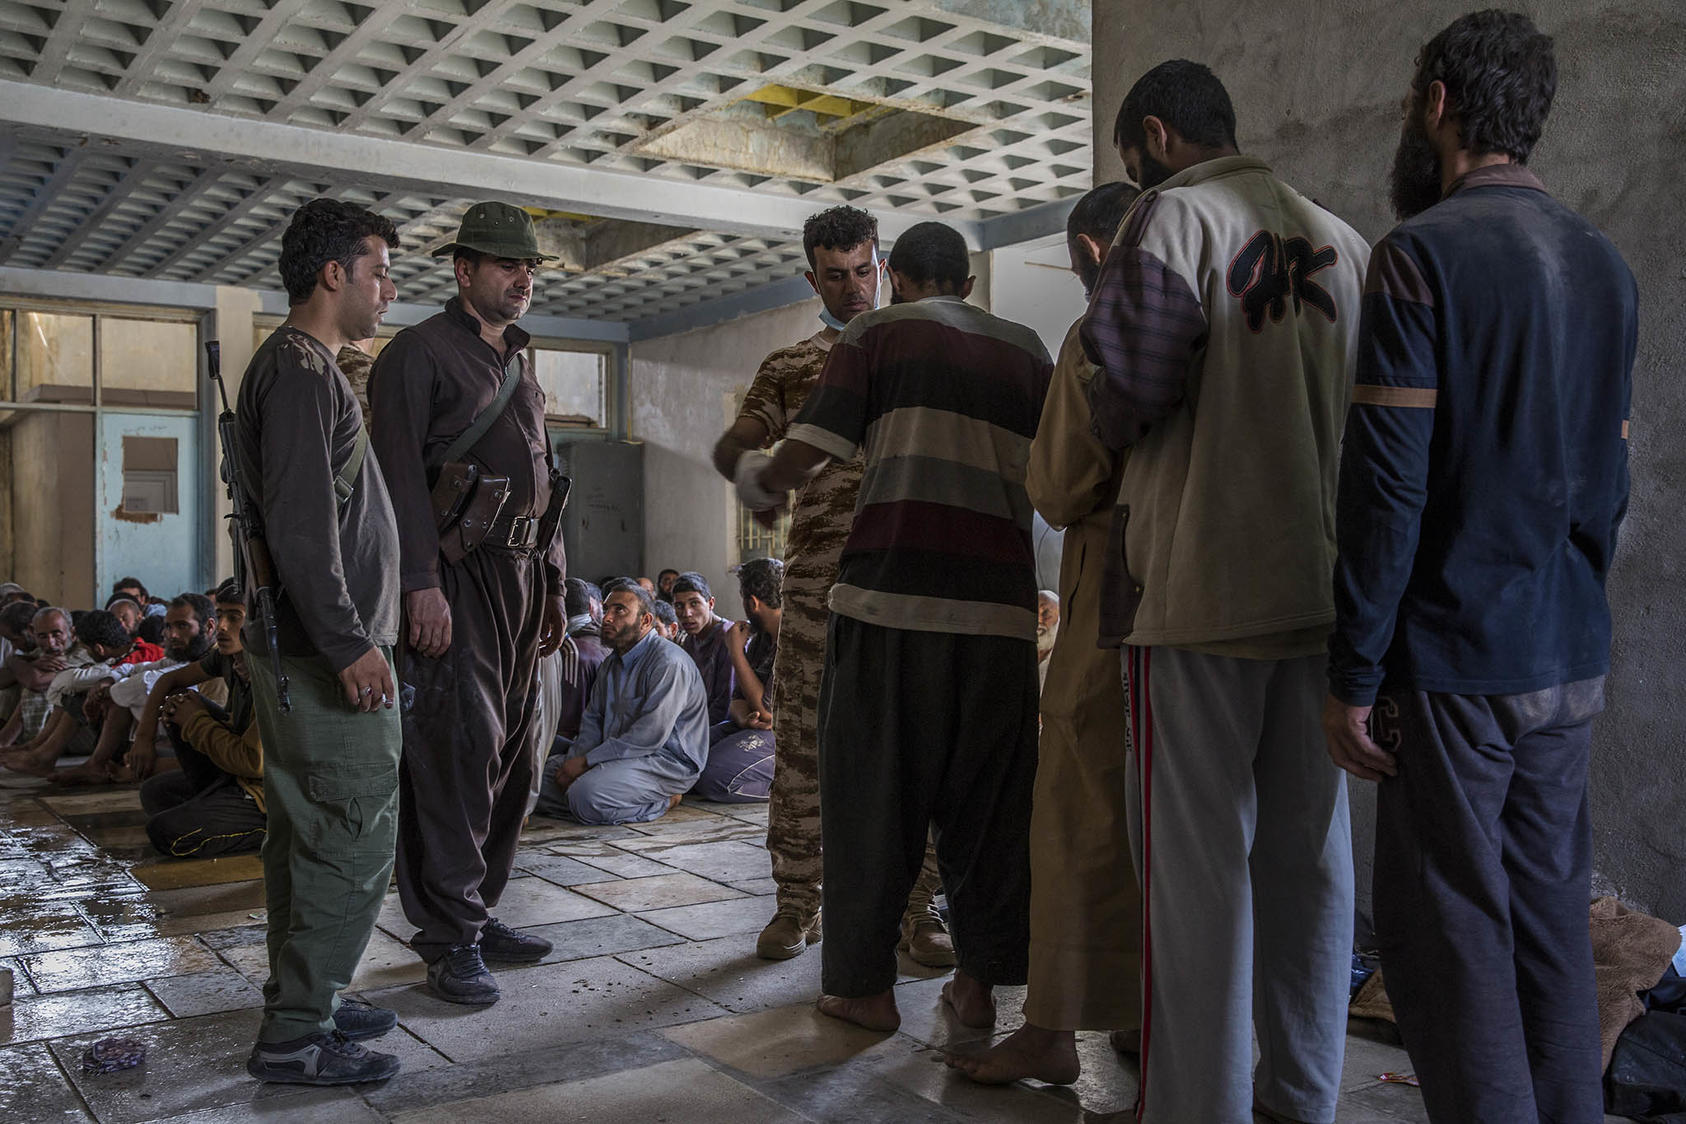 Men suspected of being Islamic State fighters are searched at a security screening center near Kirkuk, Iraq. October 1, 2017. (Ivor Prickett/The New York Times)